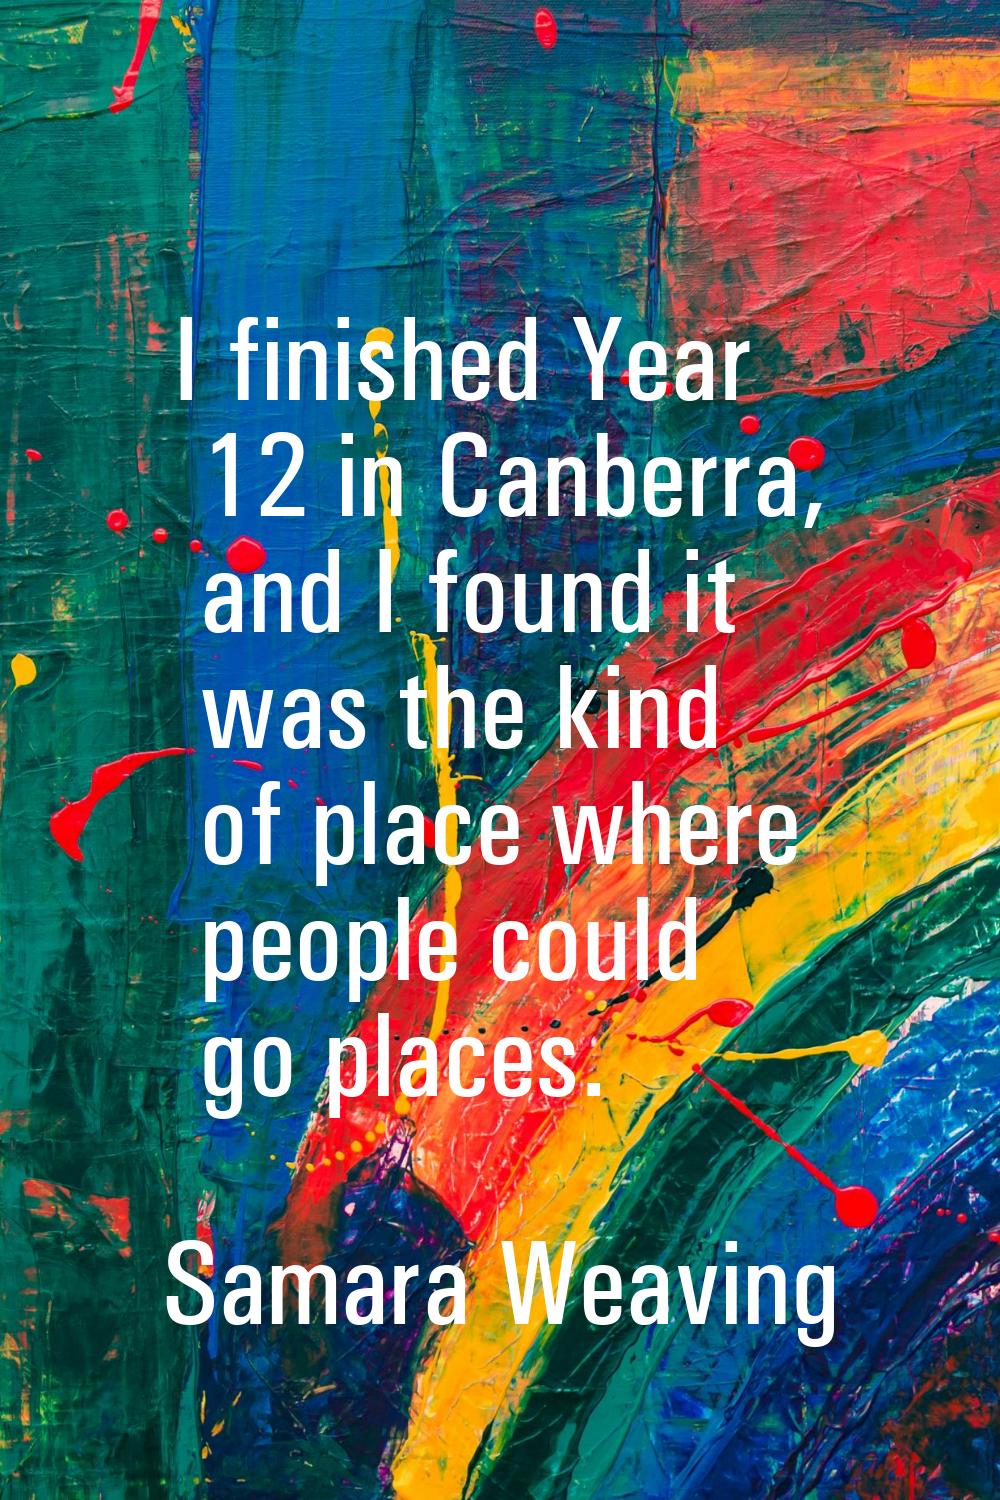 I finished Year 12 in Canberra, and I found it was the kind of place where people could go places.